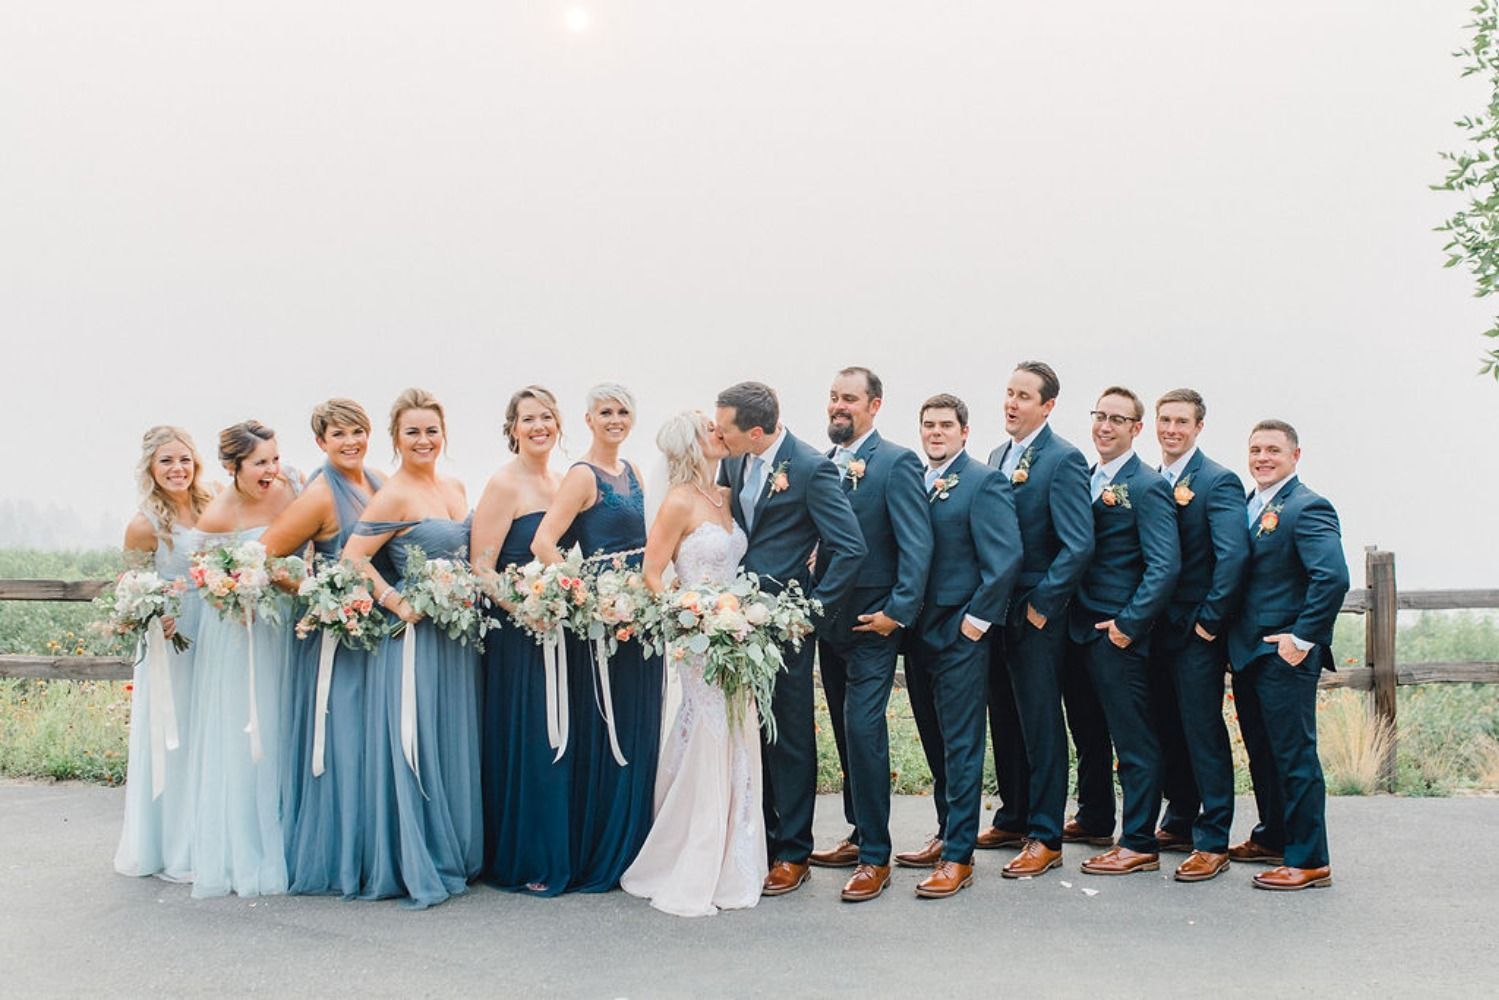 Romantic Garden Party Wedding in Shades of Blue -   17 dress Party maids ideas